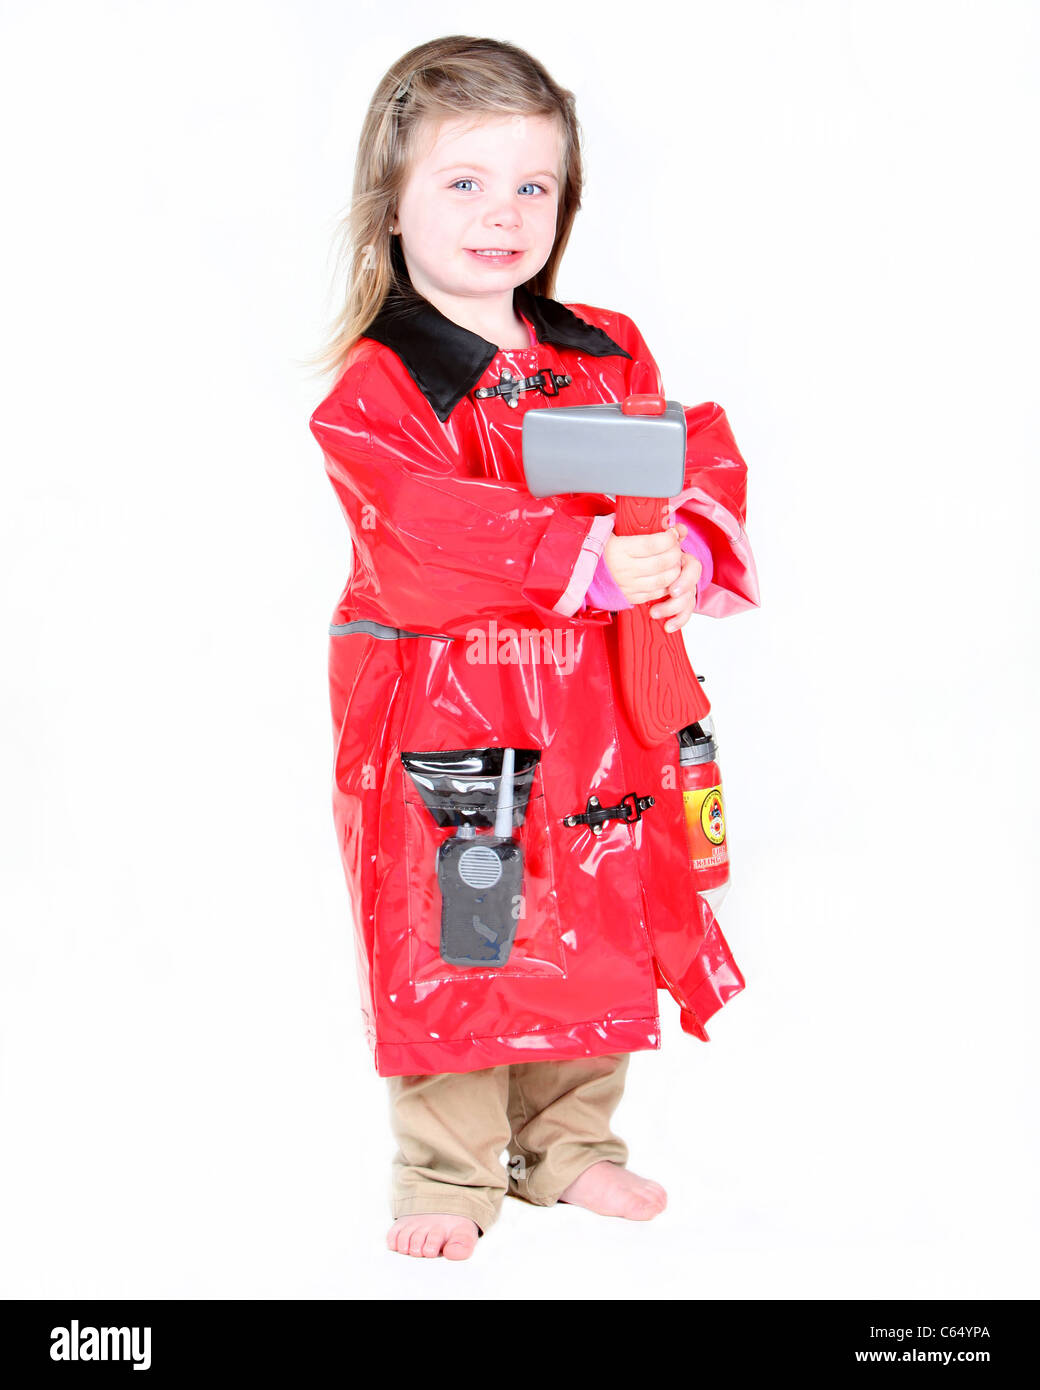 Toddler girl in firefighter costume with axe on white background Stock Photo